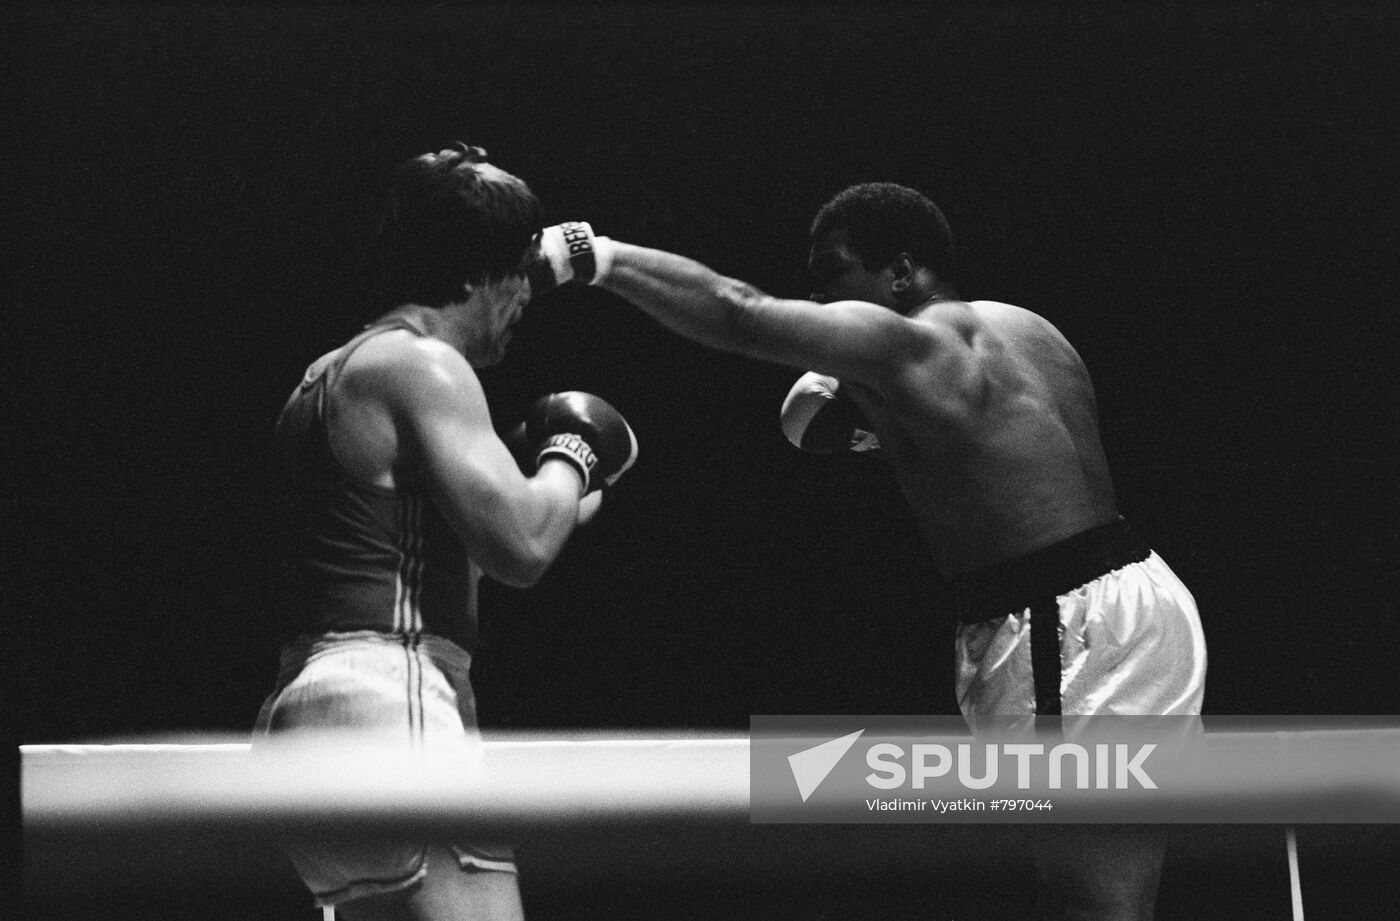 American legendary boxer Muhammad Ali visits Moscow